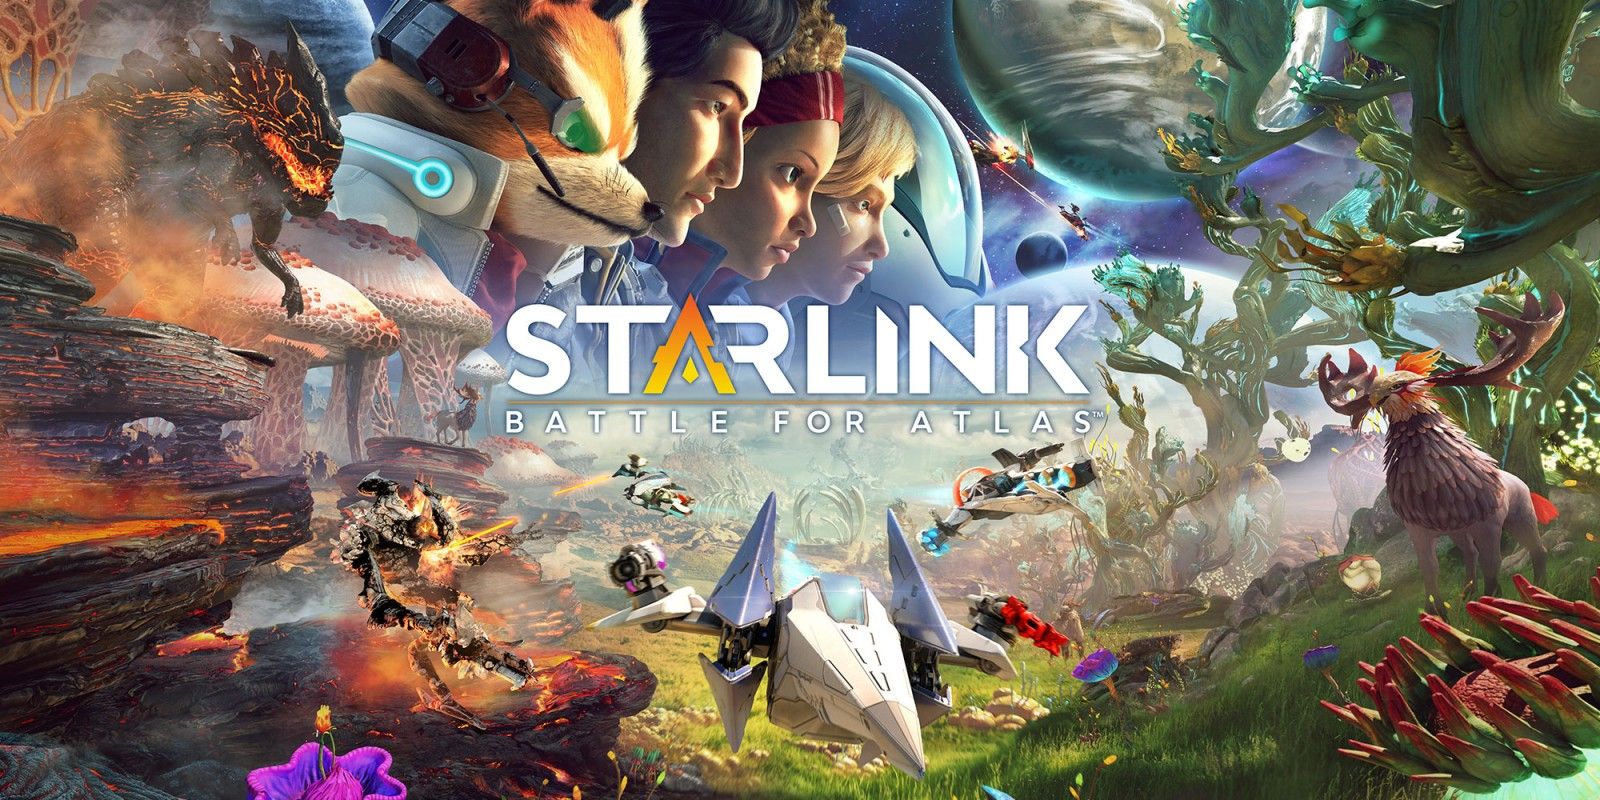 Fox McCloud and the Starlink cast in Starlink: Battle For Atlas banner